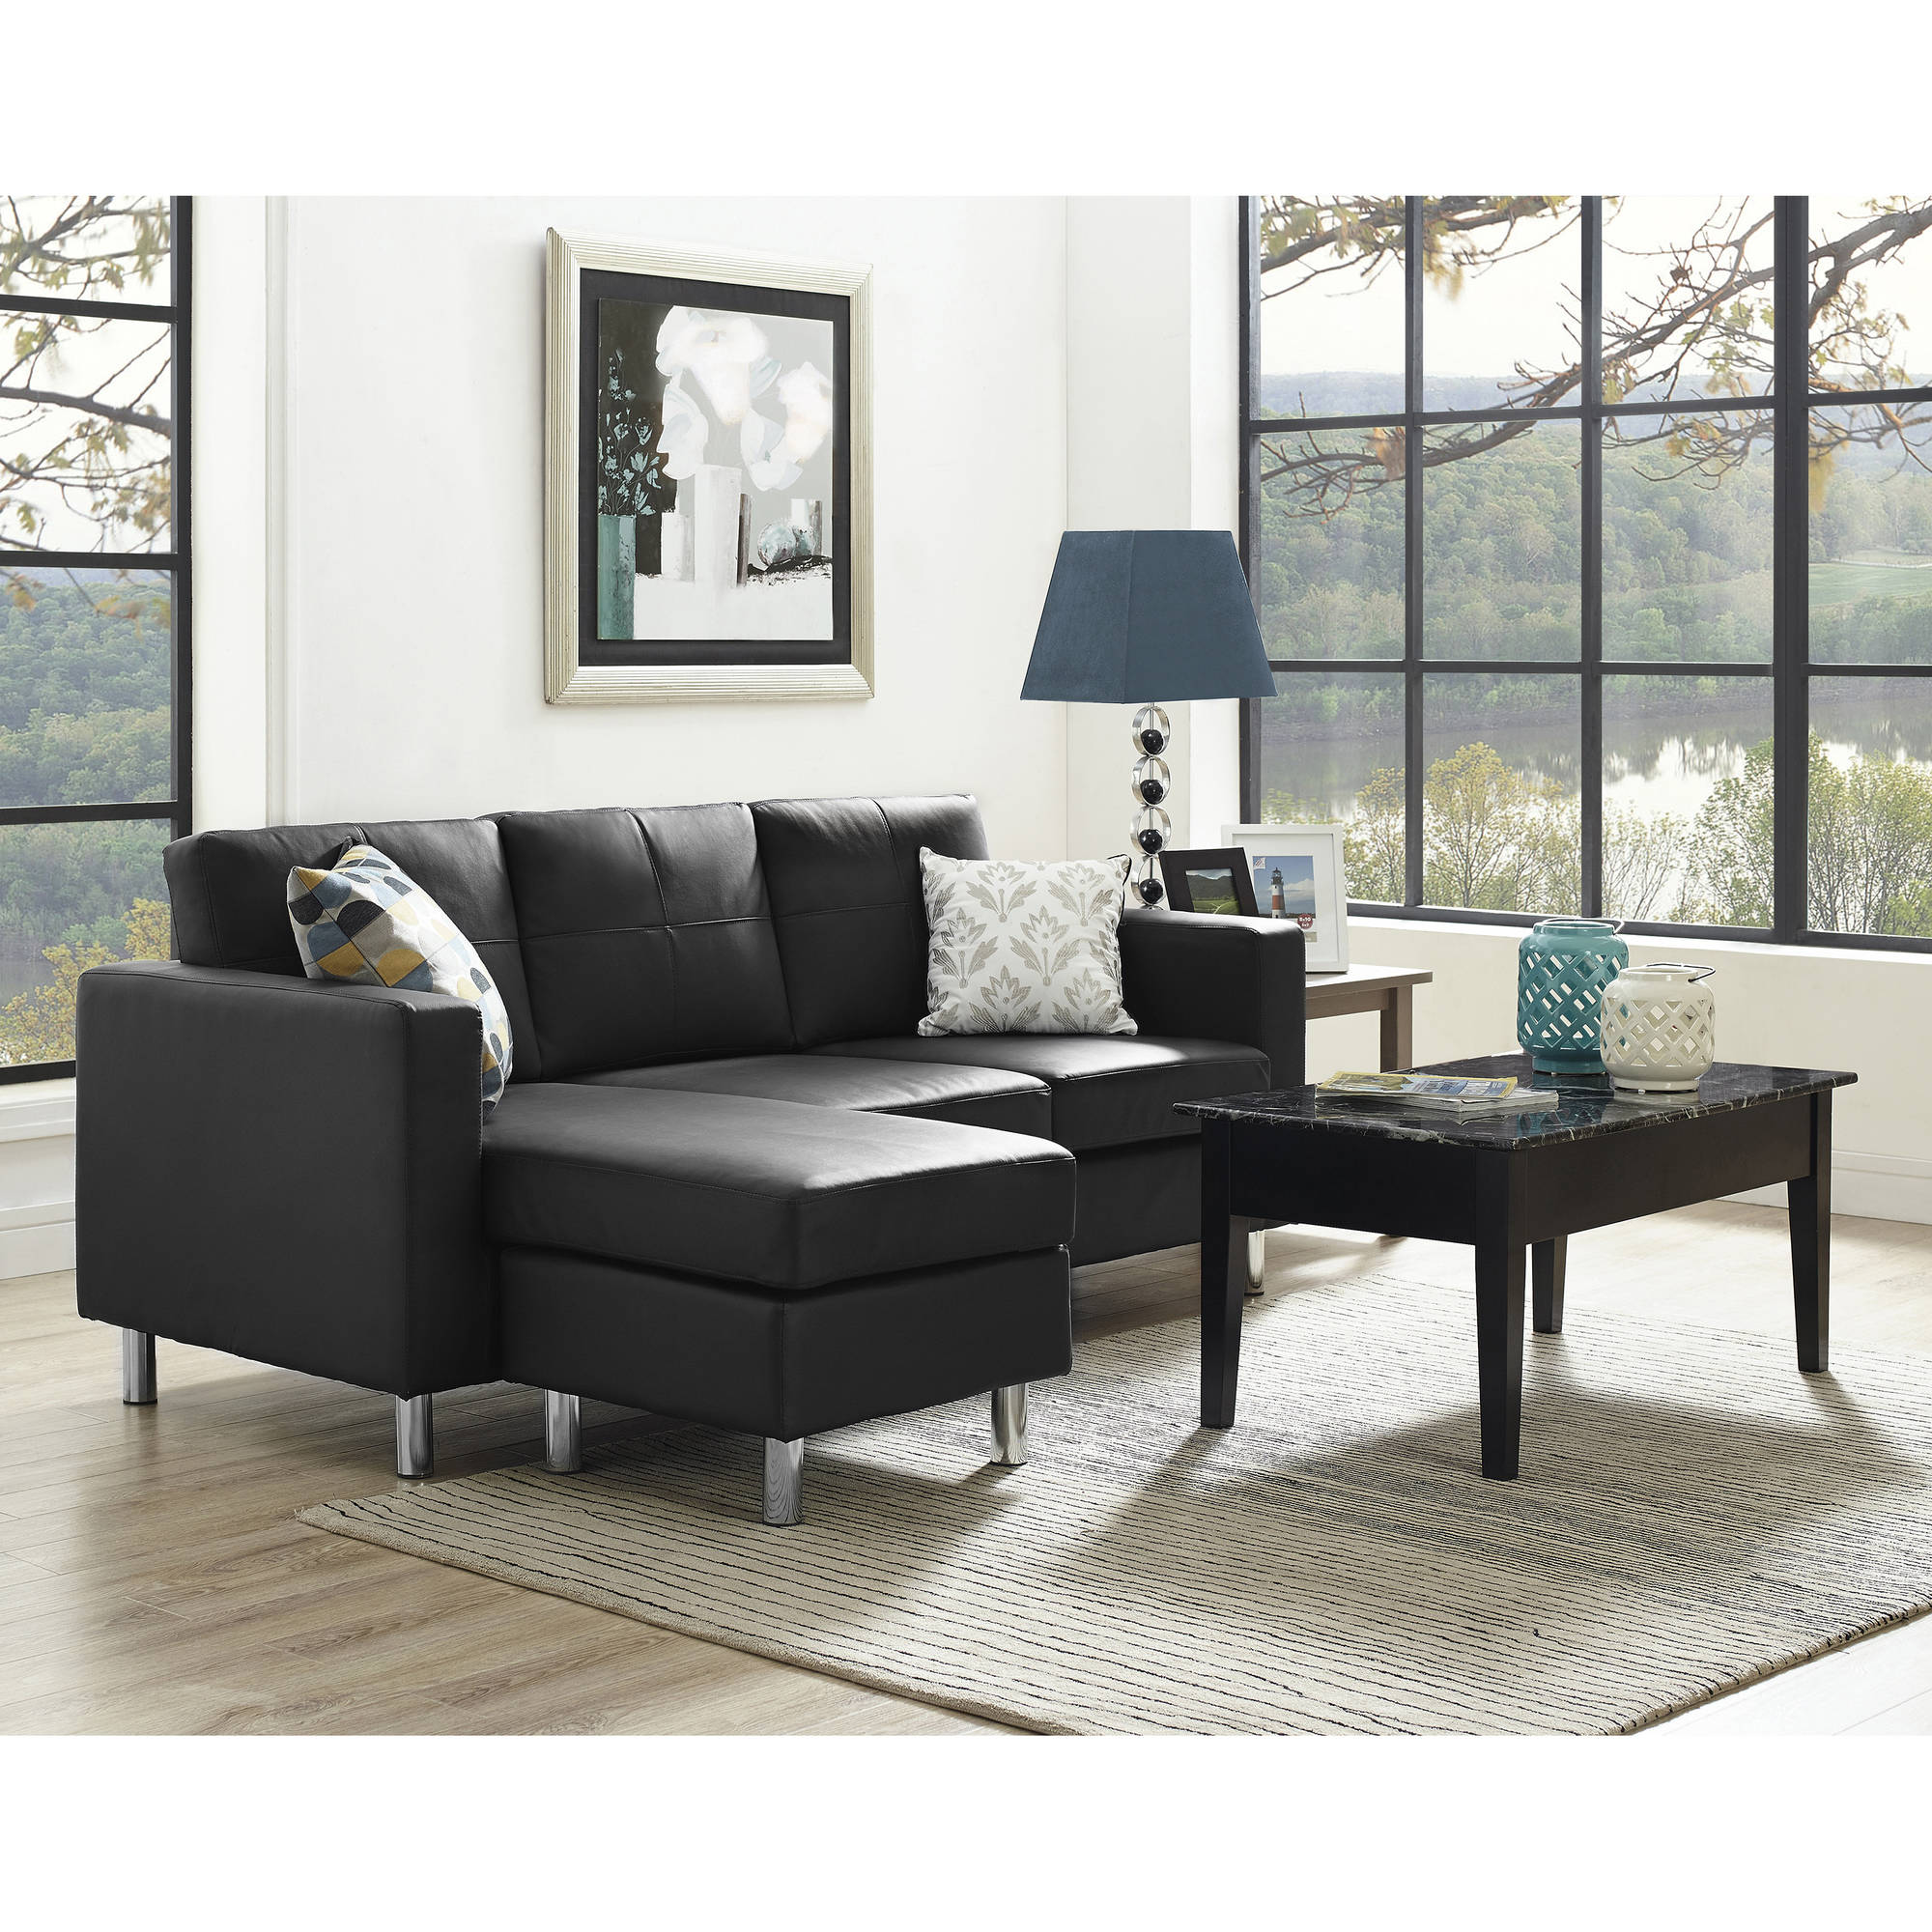 sectional sofa for small spaces dorel living small spaces configurable sectional sofa, multiple colors YOHYUFK